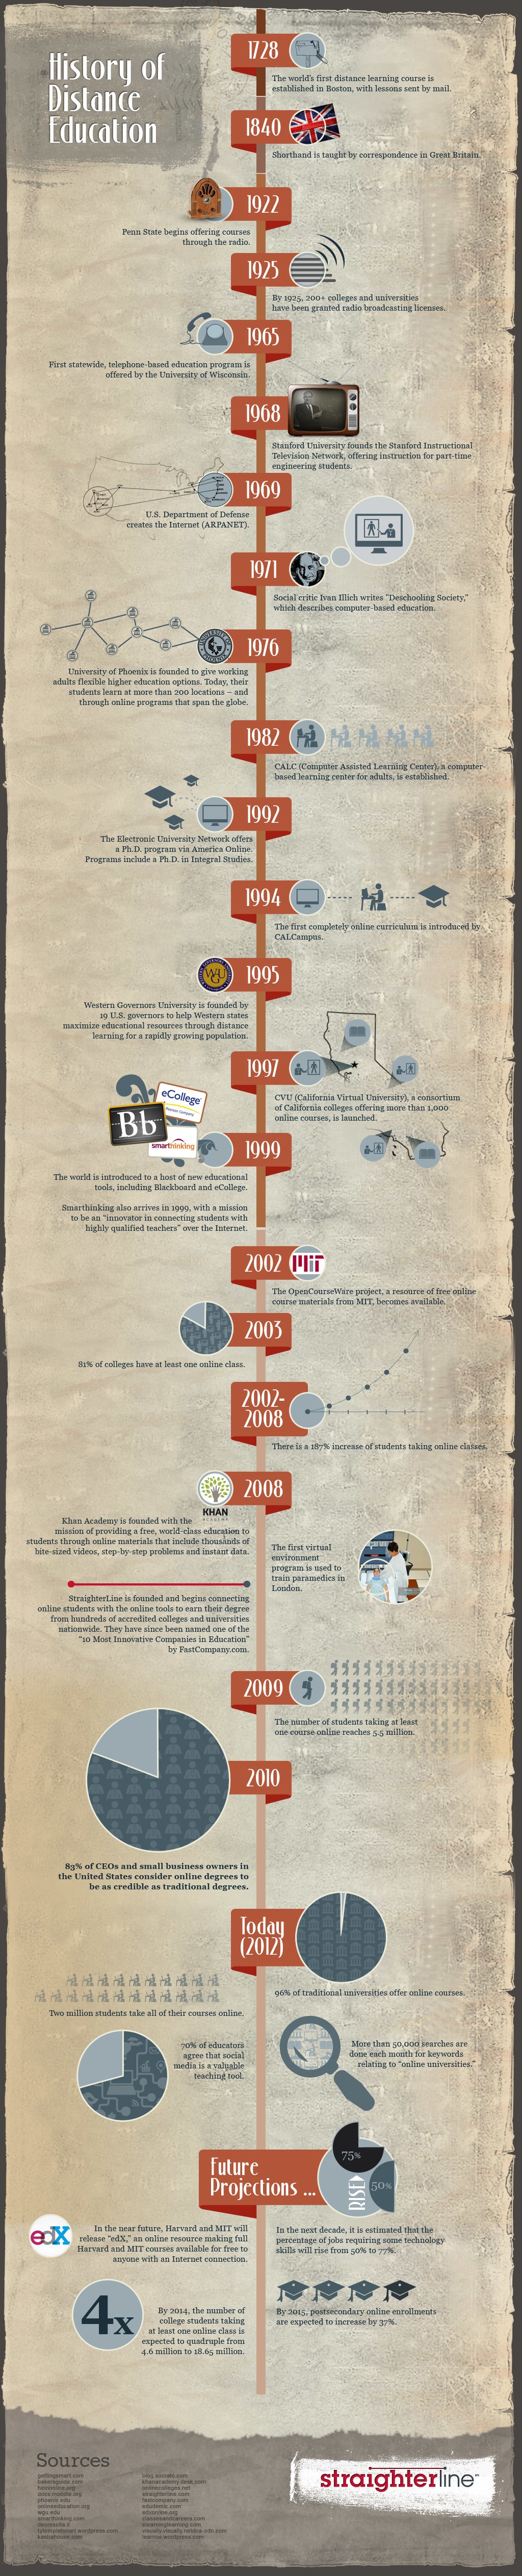 History-of-Distance-Education-Infographic